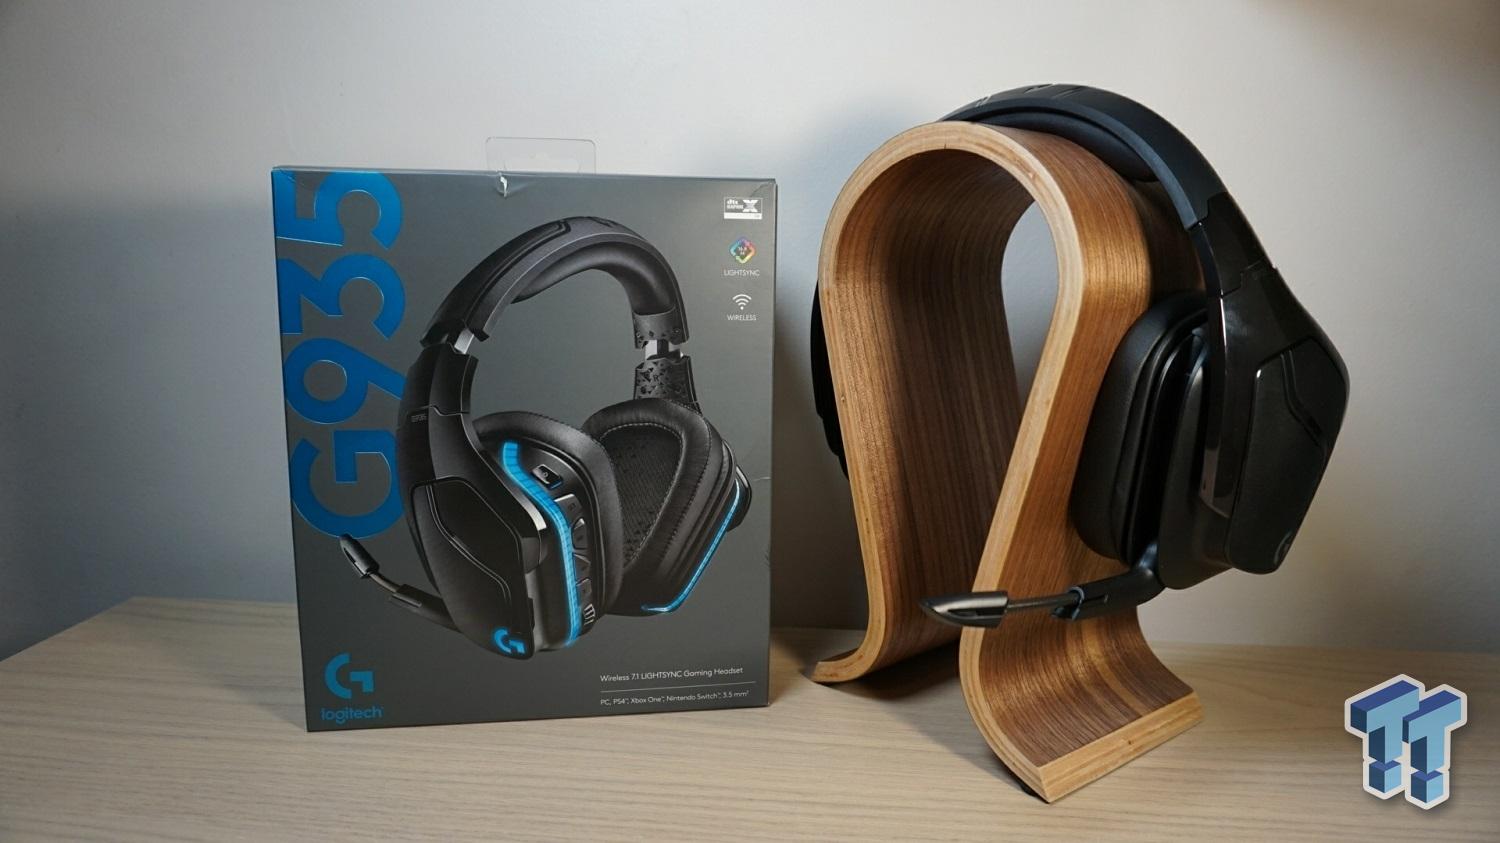 Uden Ironisk grill Logitech G935 Wireless 7.1 Gaming Headset Review